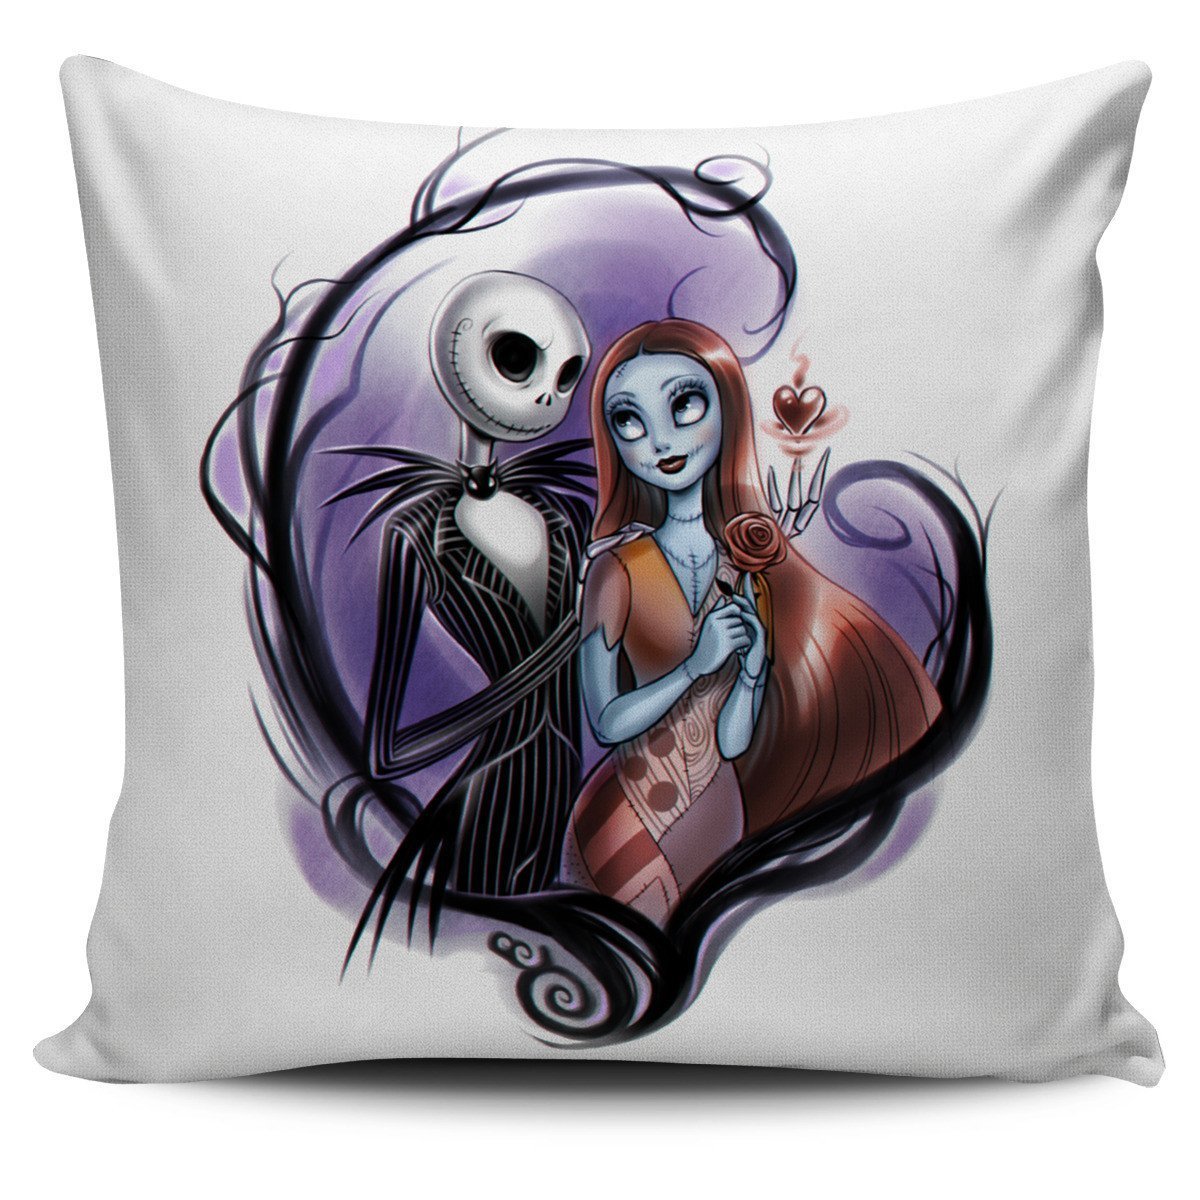 Jack Skellington Nightmare Before Christmas Pillow Cover 2